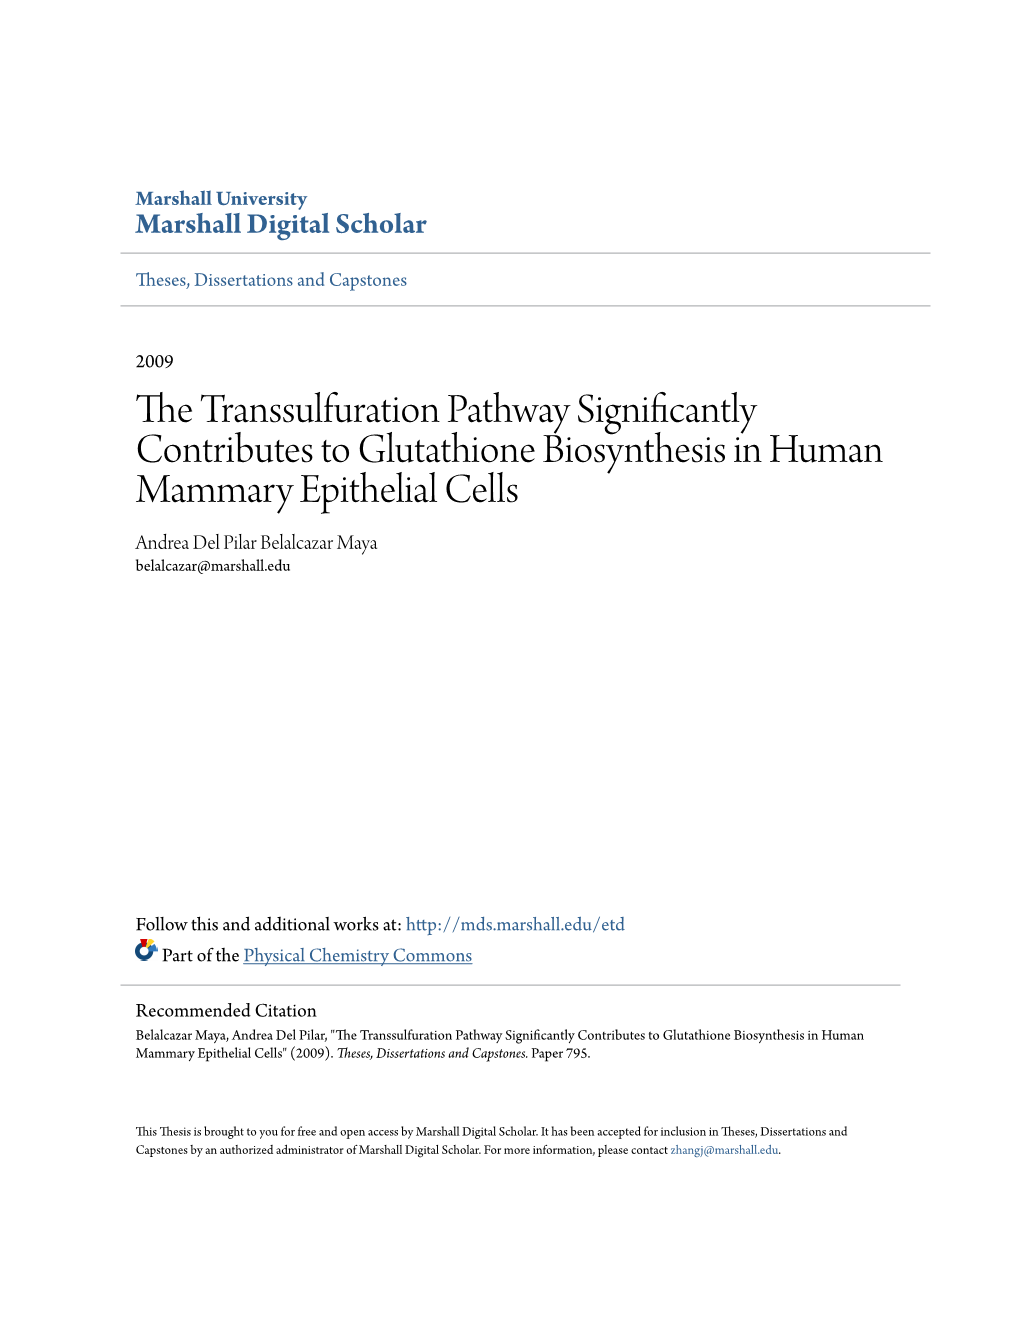 The Transsulfuration Pathway Significantly Contributes to Glutathione Biosynthesis in Human Mammary Epithelial Cells